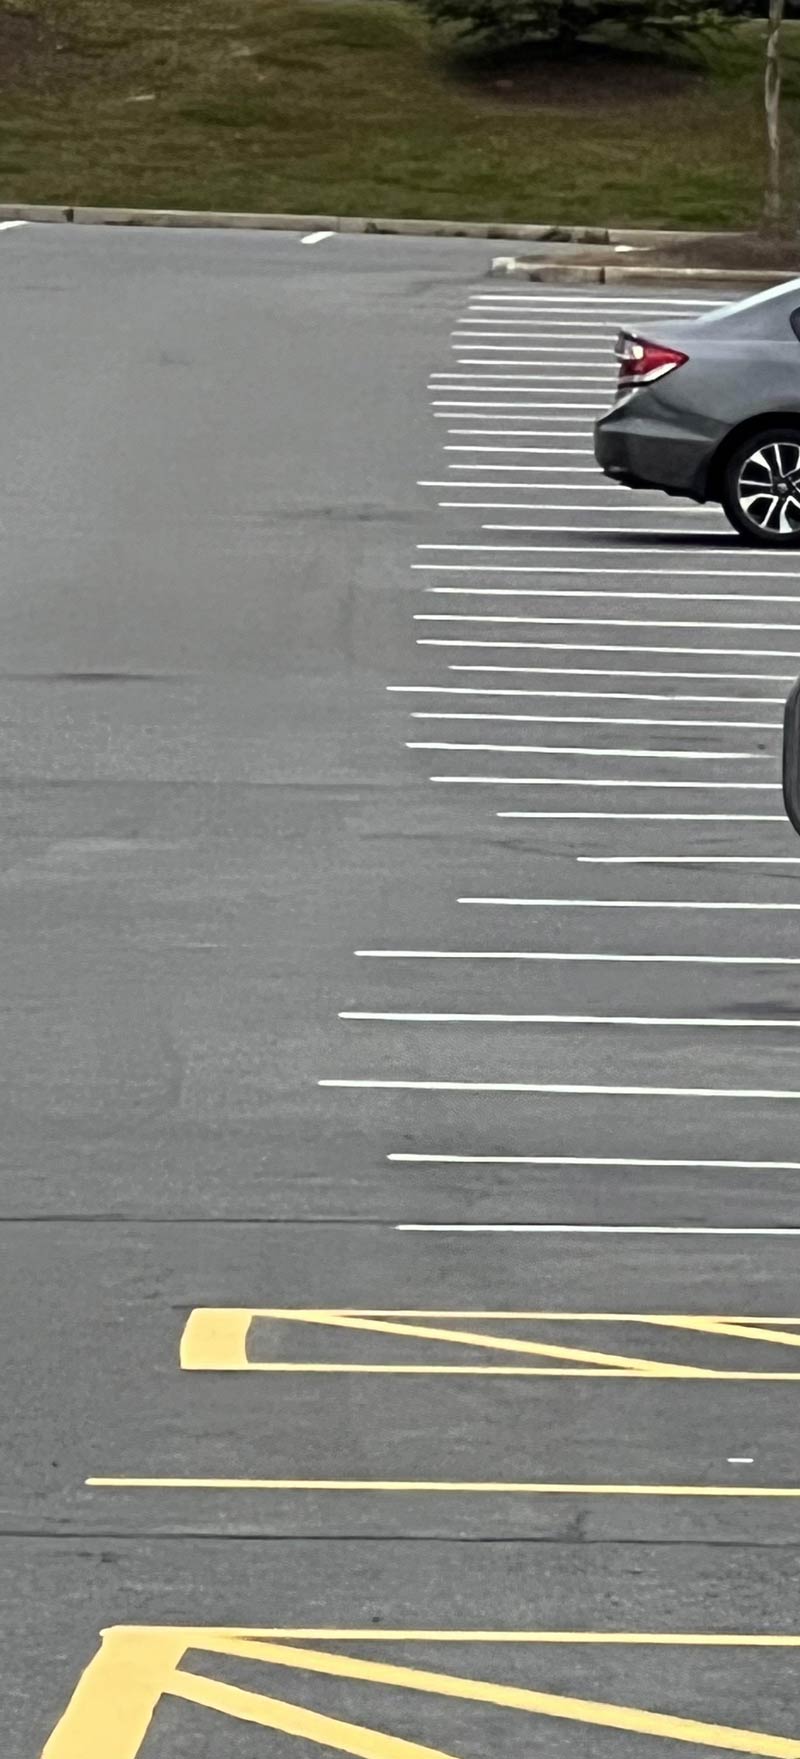 Painted the lines boss